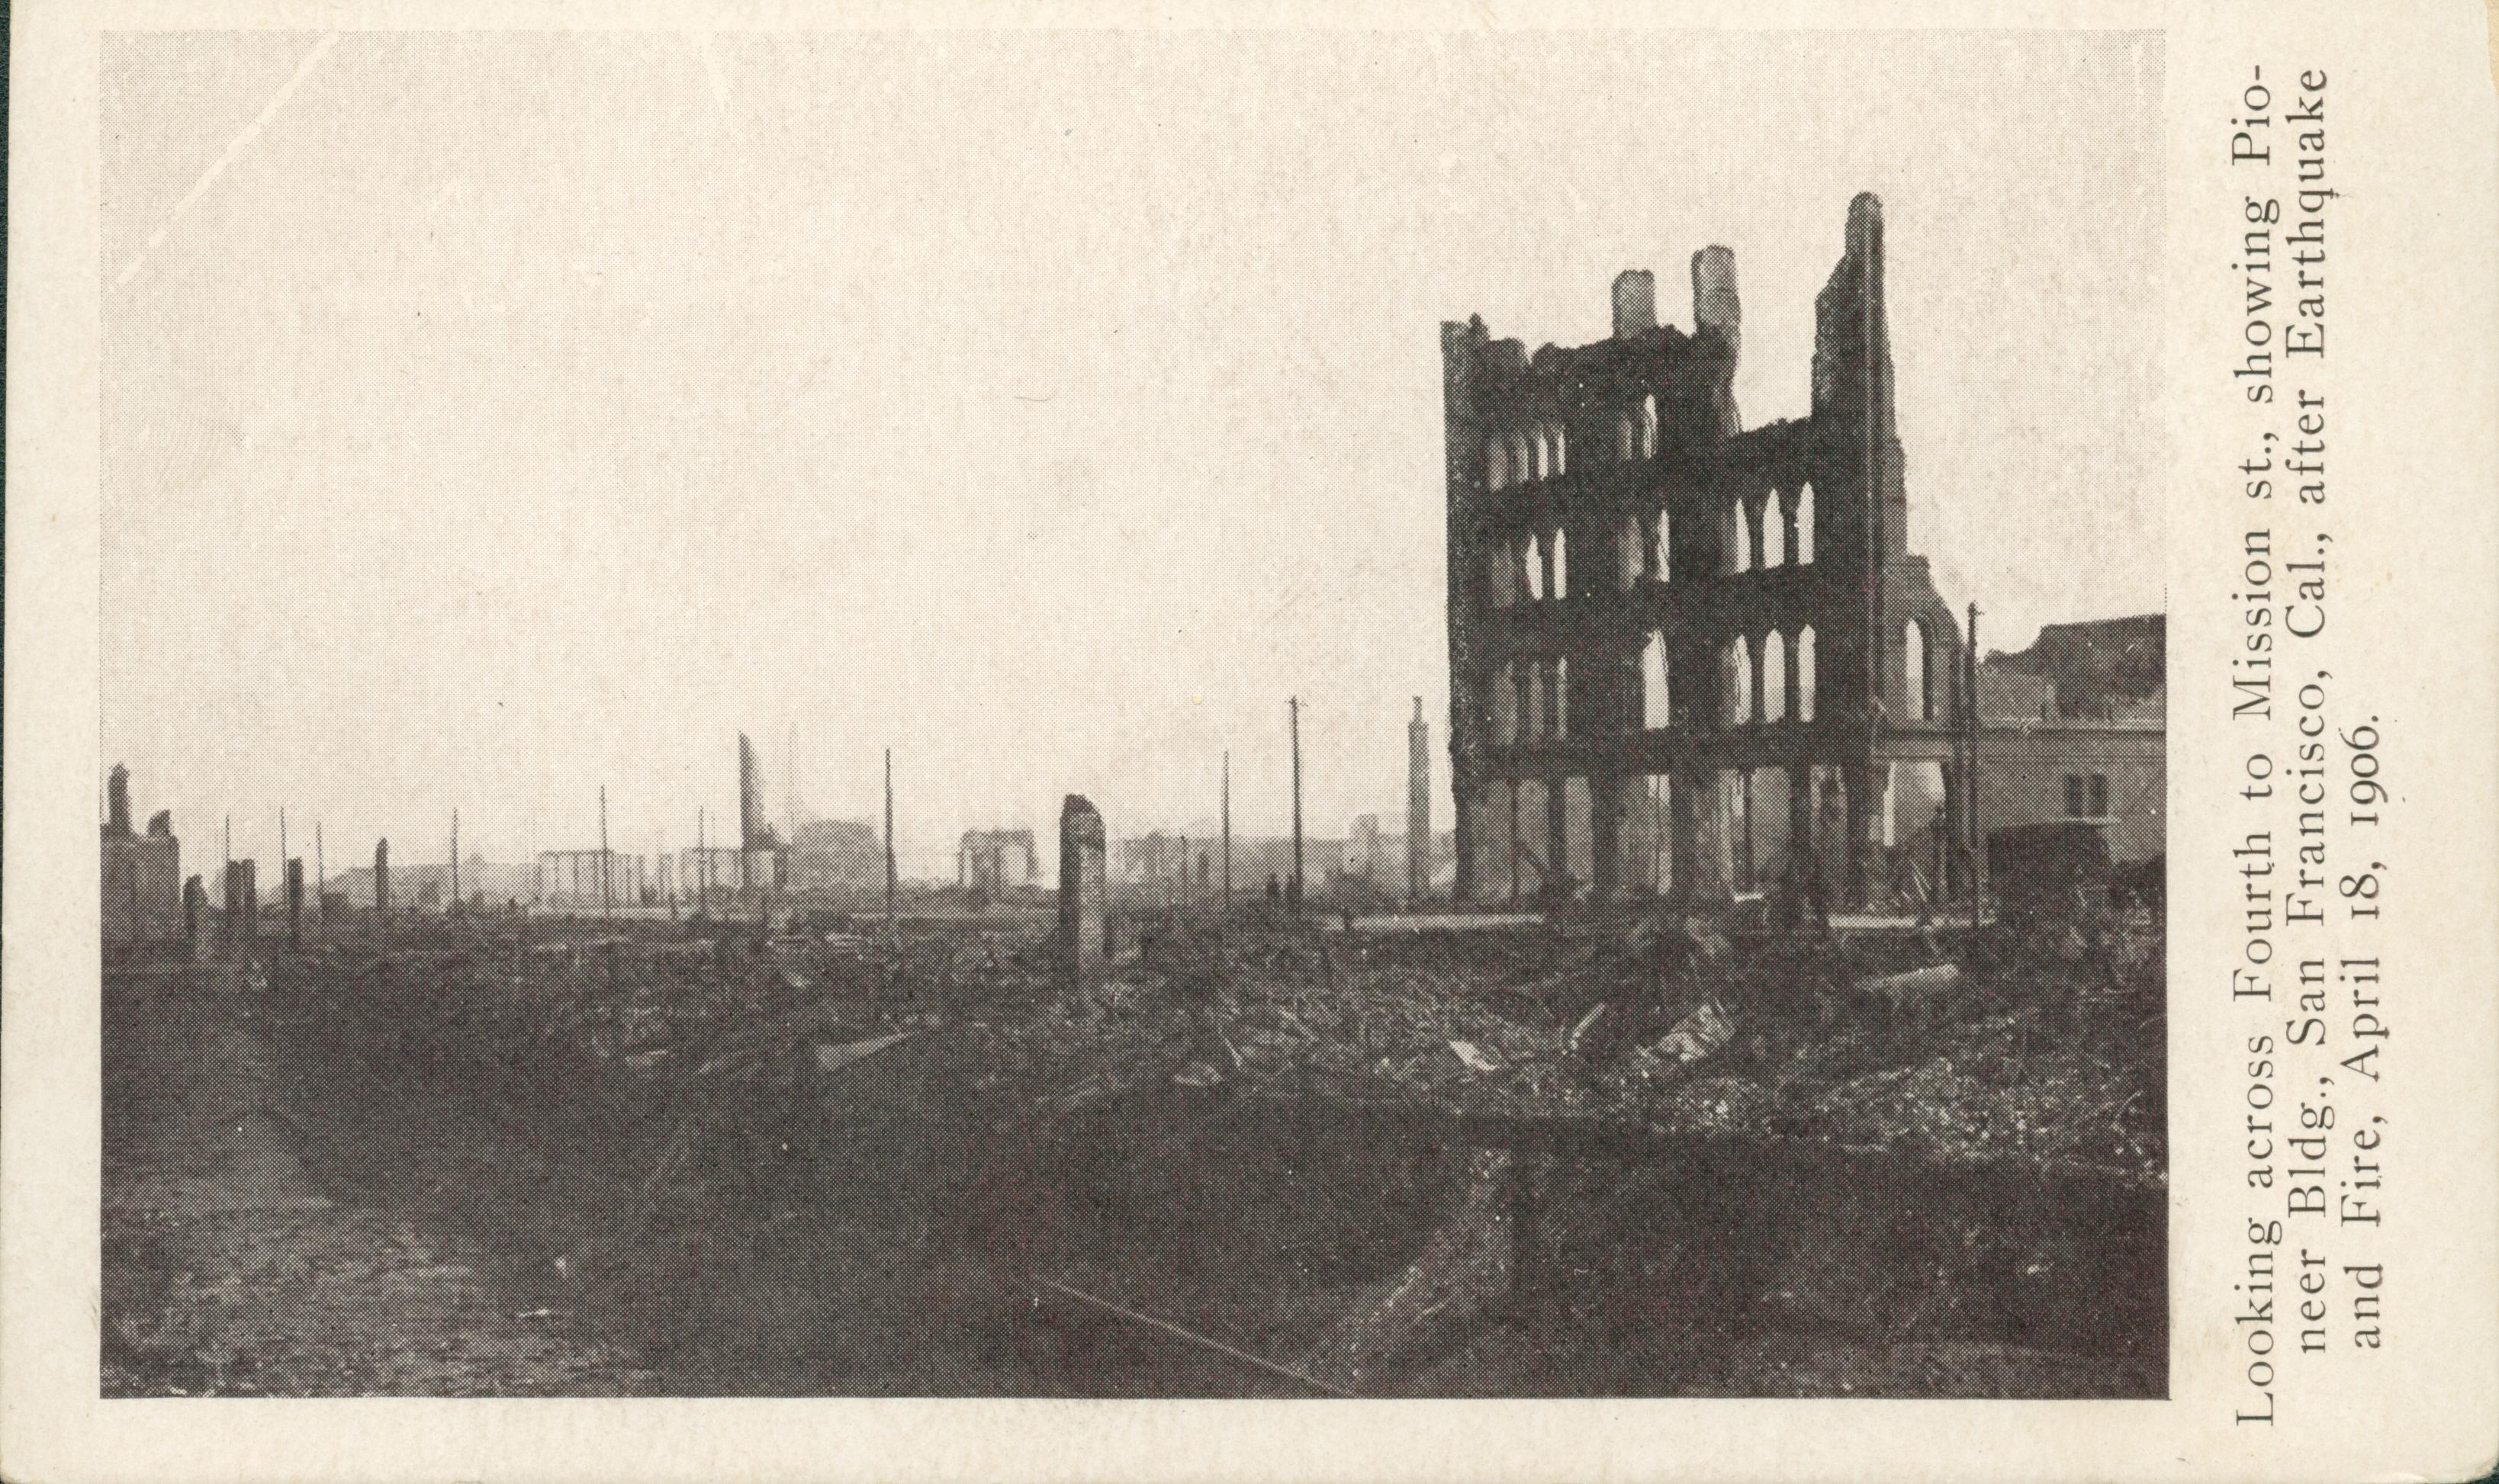 Shows a street lined by rubble with one building barely standing.